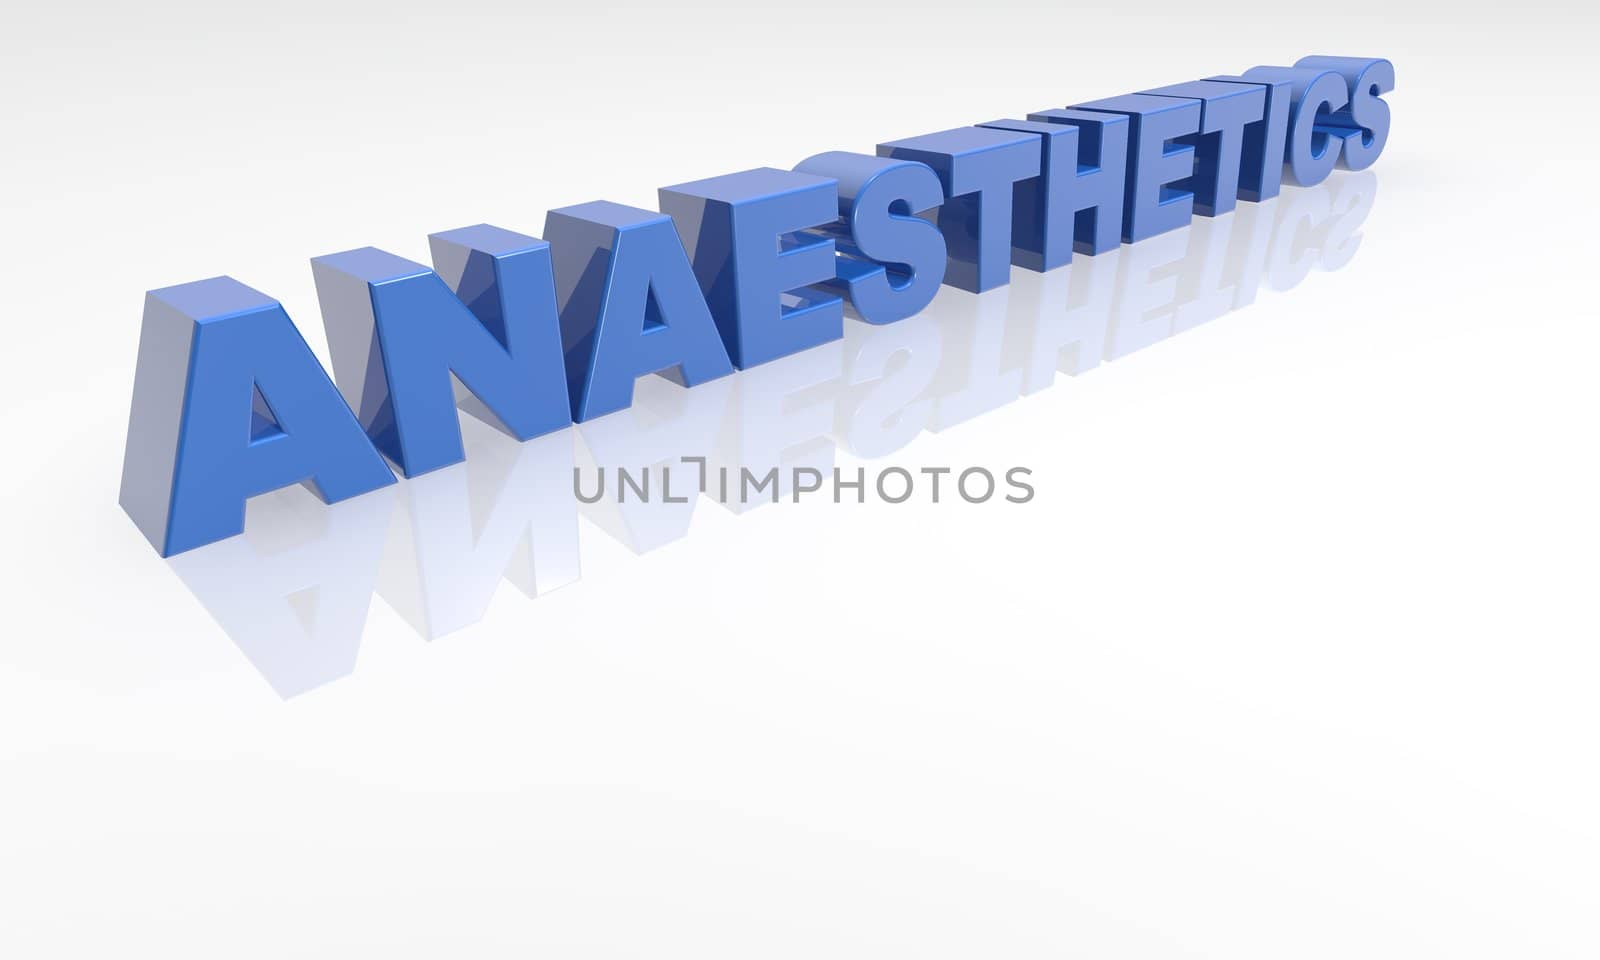 anaesthetics 3d blue font isolated on white by jeremywhat